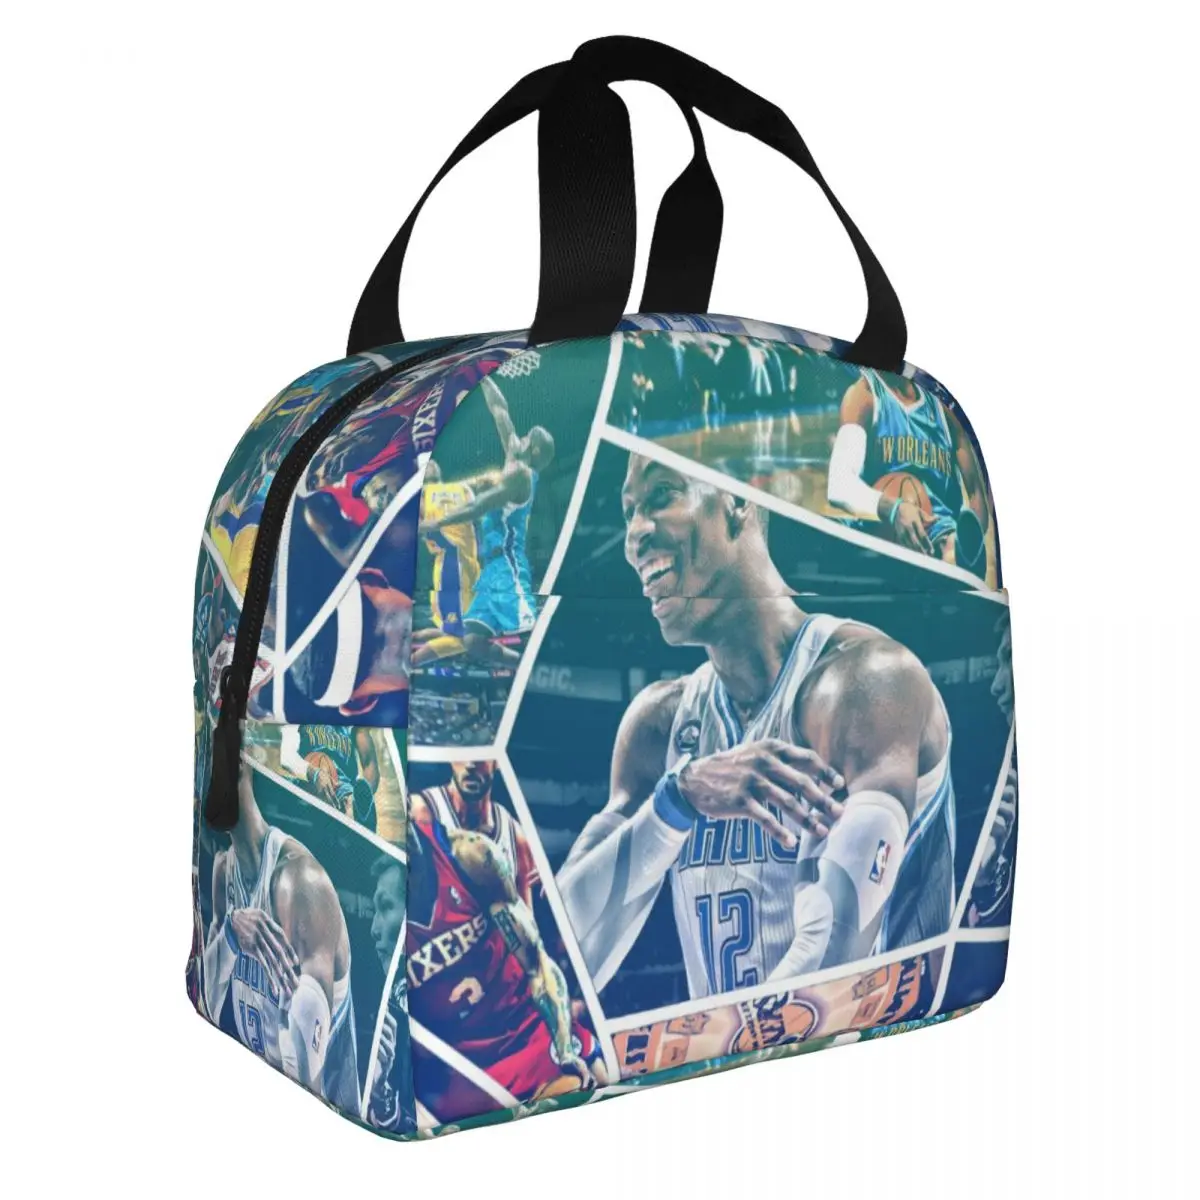 Basketball Lunch Bento Bags Portable Aluminum Foil thickened Thermal Cloth Lunch Bag for Women Men Boy